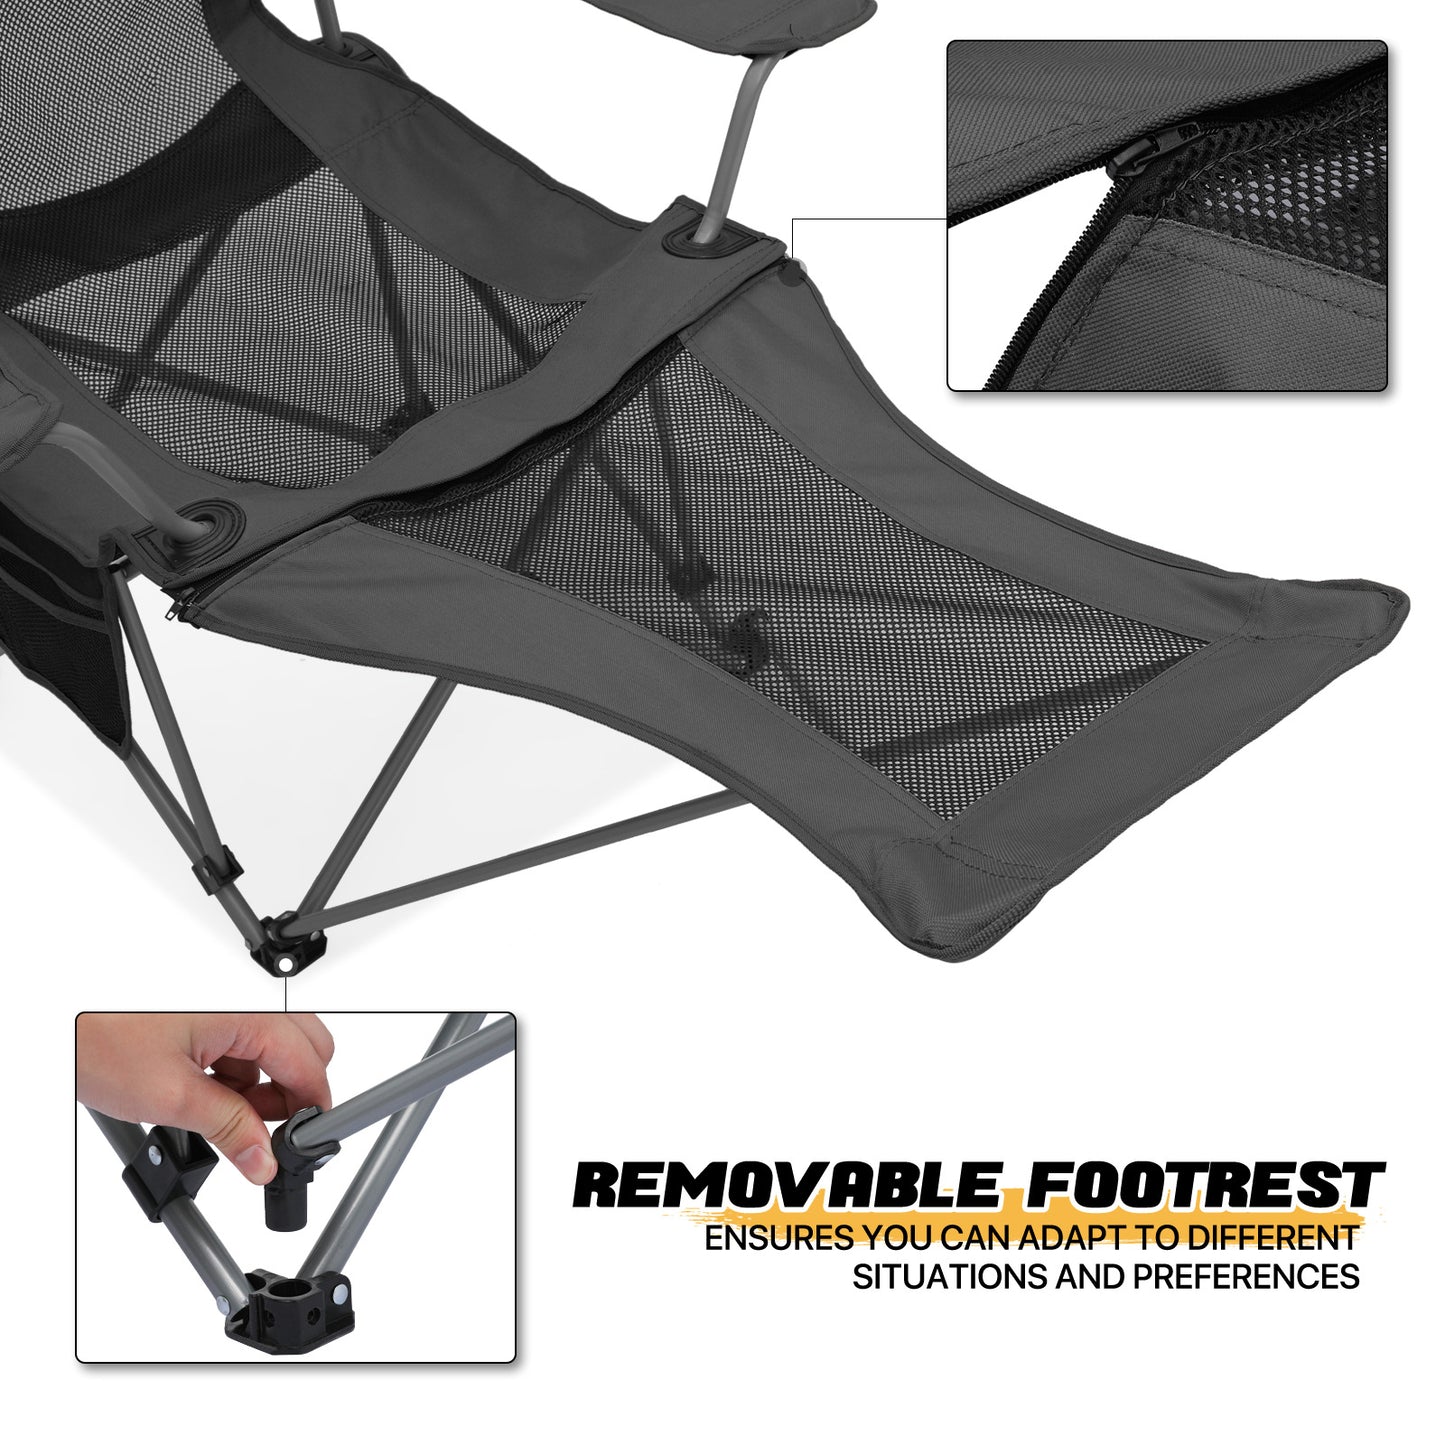 Outdoor Camping Chairs - Steel Tube - Oxford Fabric